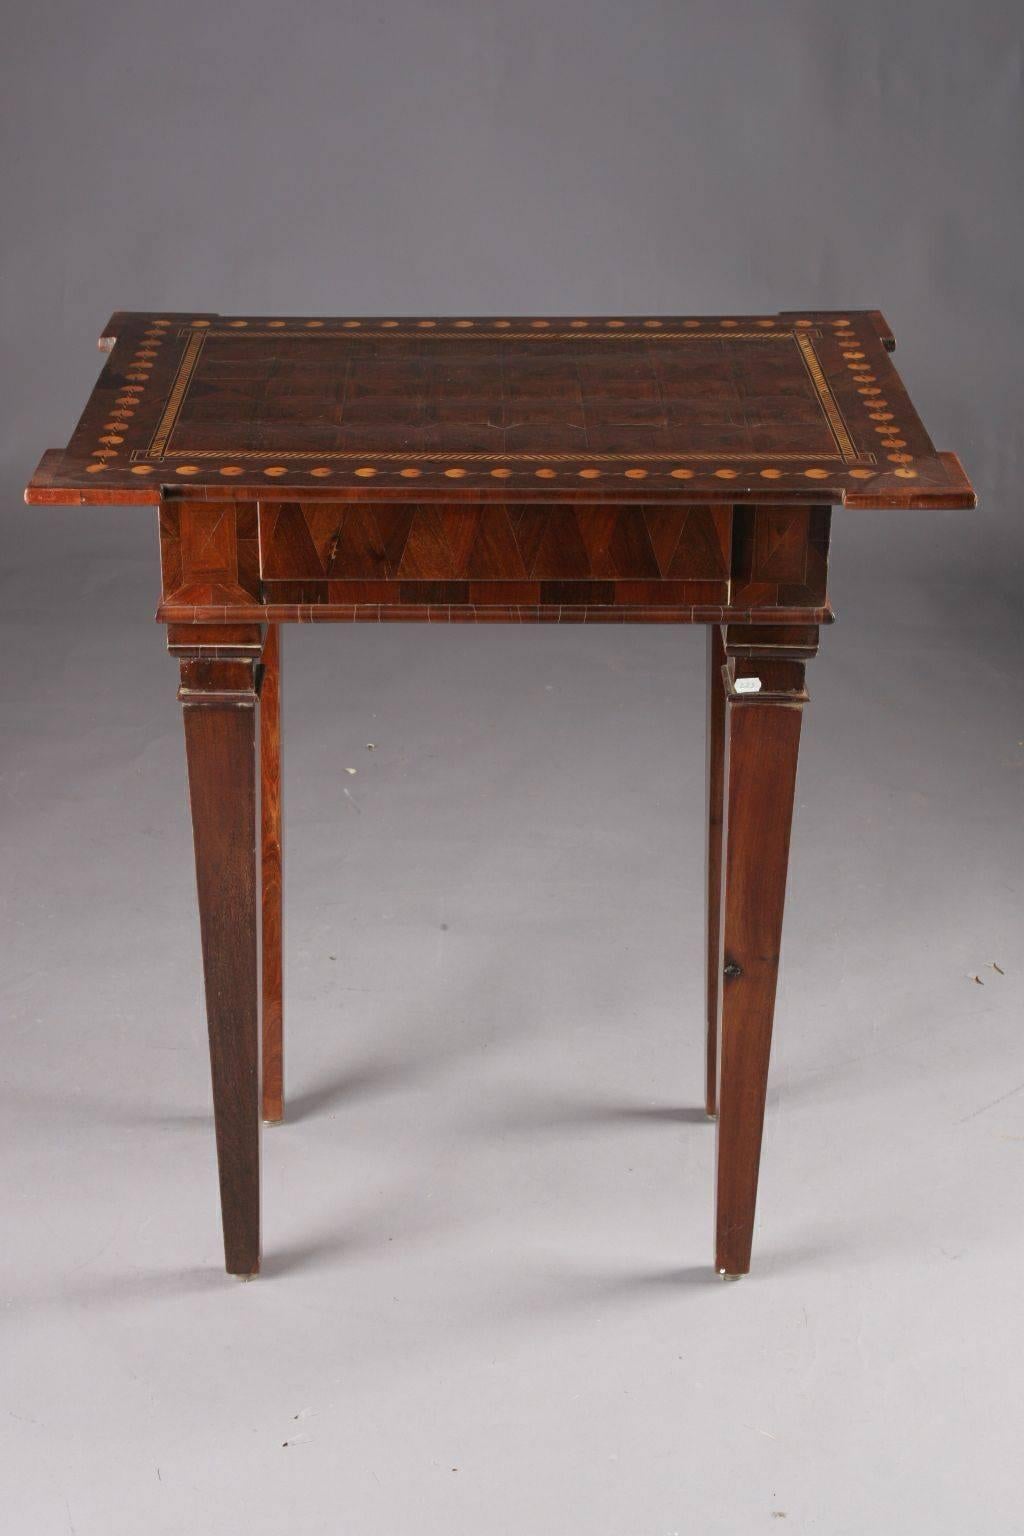 Sensational side table from the classicism, circa 1790.
 oak. Straight-edged frame base on four pointed tines. The tabletop, which is folded at the corners, with a diced inlay work, depending on the viewing angle, results in a fascinating 3D